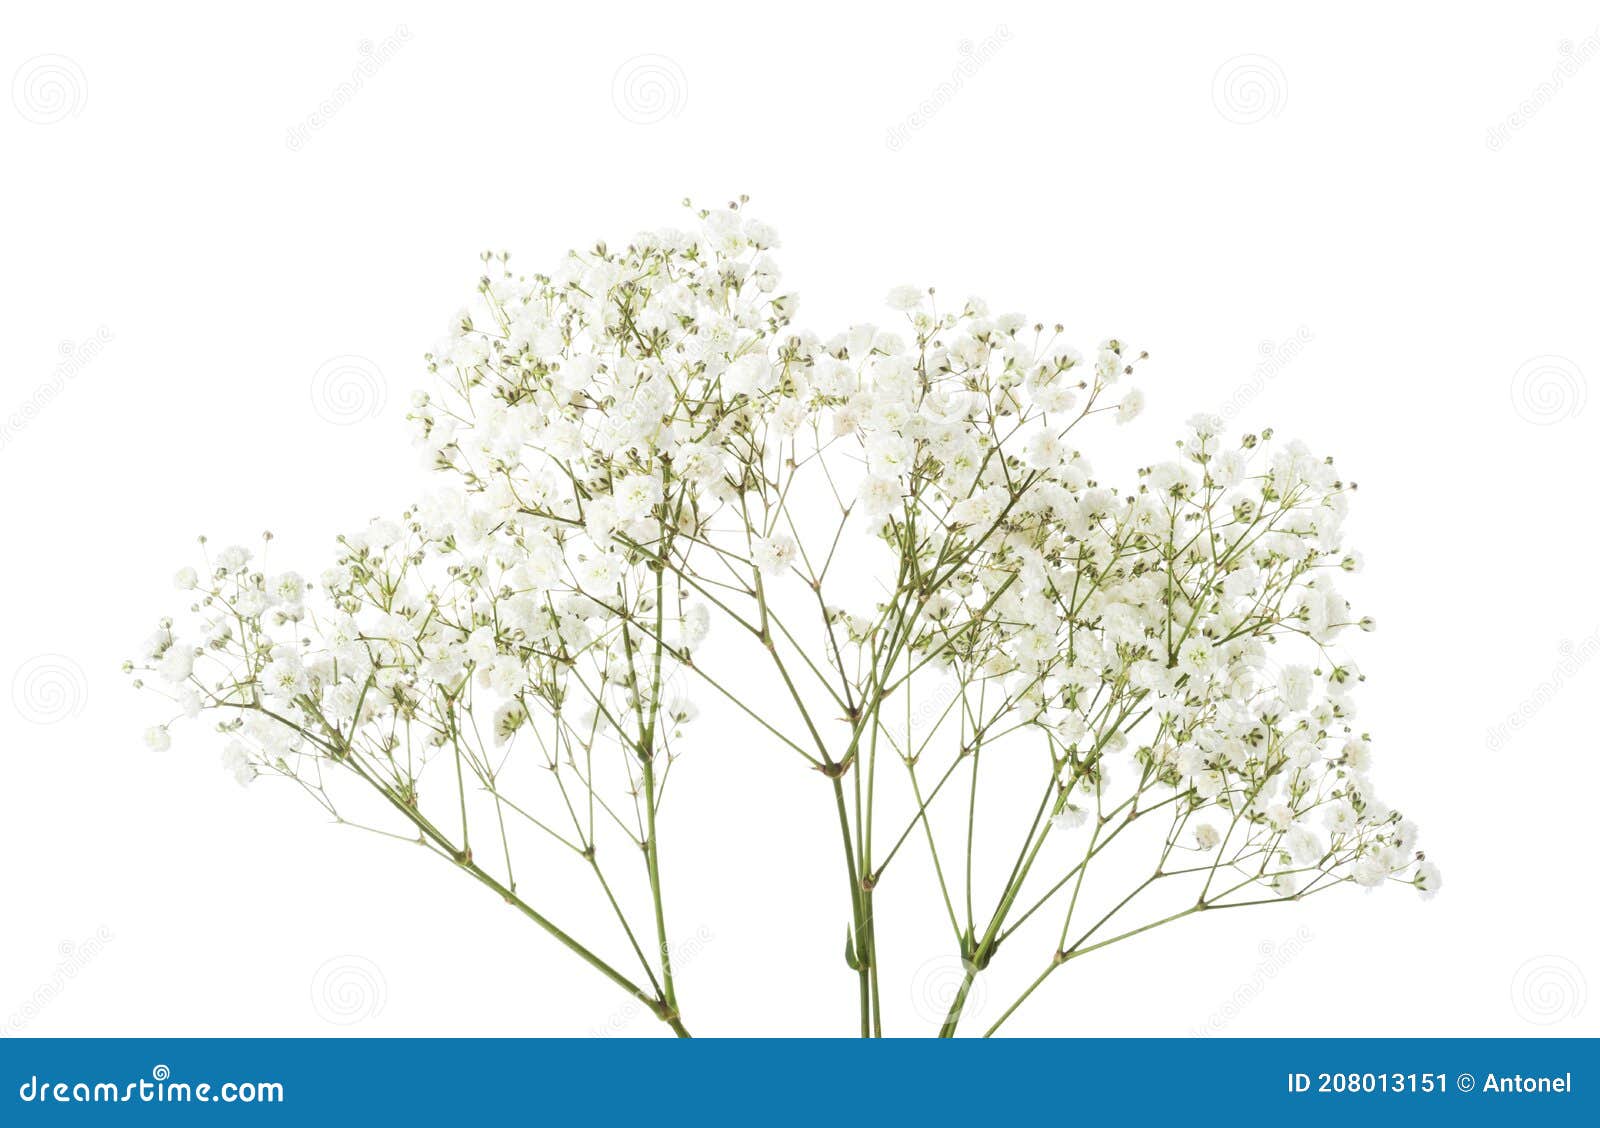 twigs with small white flowers of gypsophila baby`s-breath  on white background.  large depth of field  dof